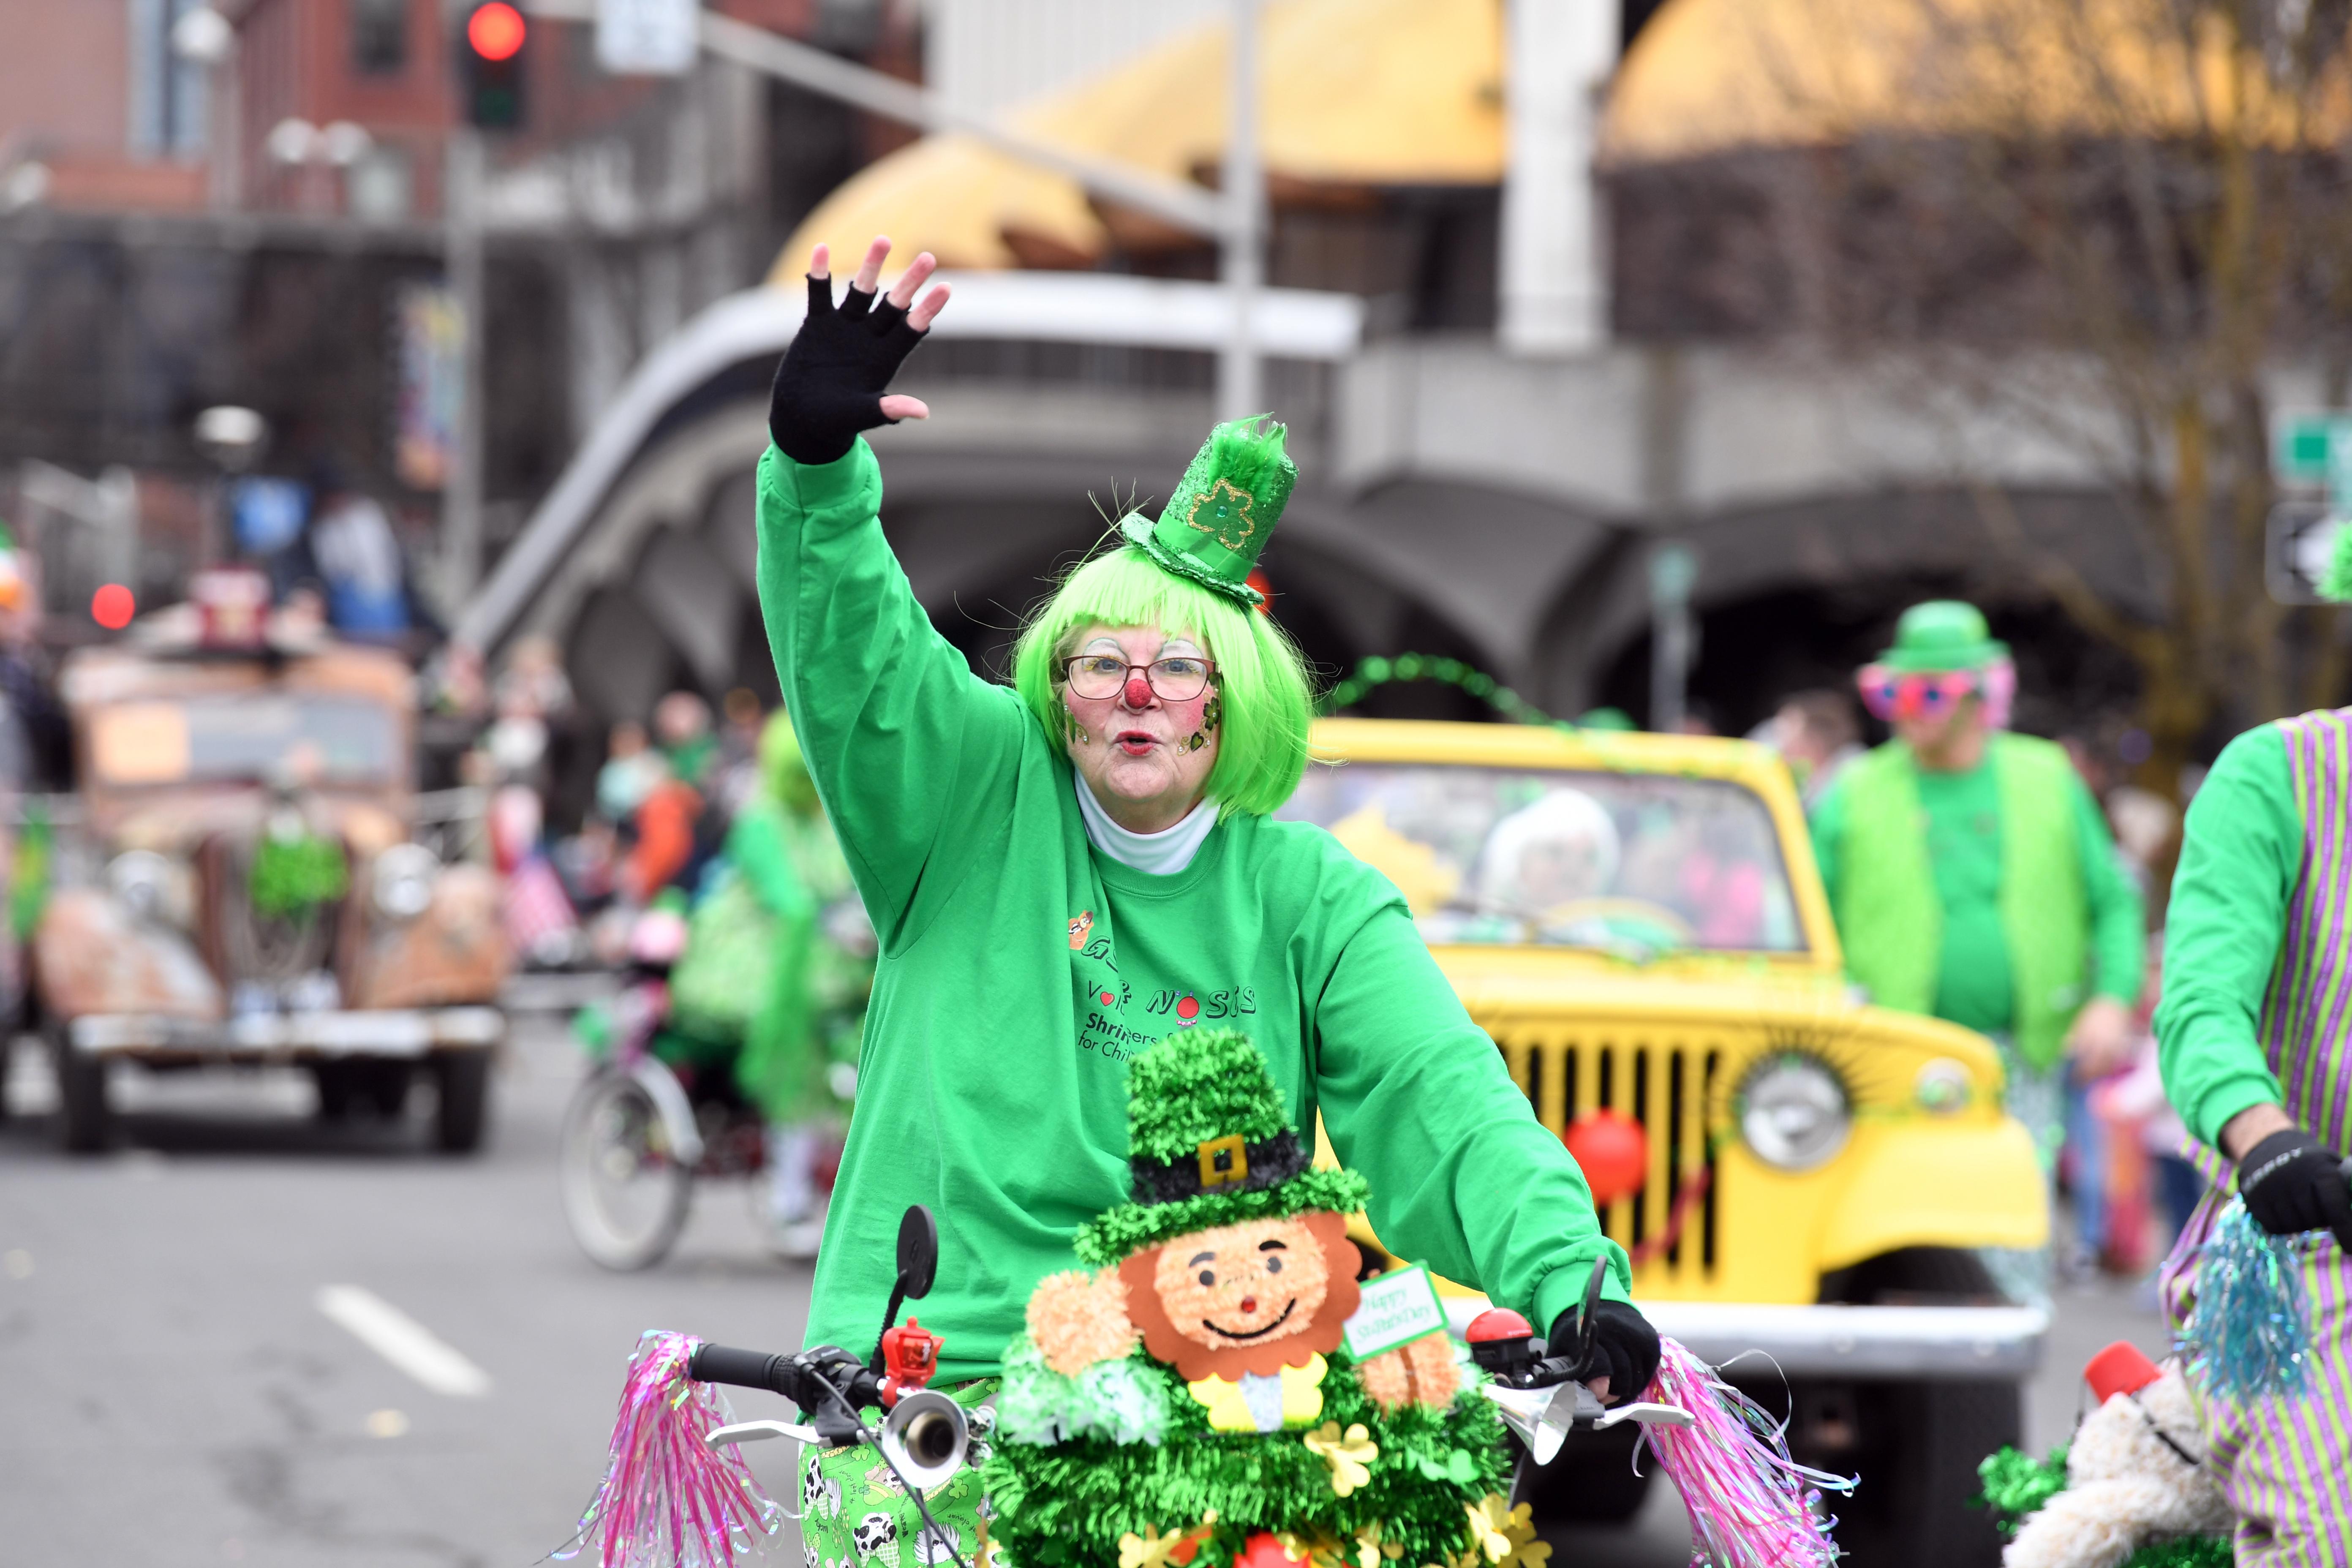 St. Patrick’s Day Parade signup underway The SpokesmanReview